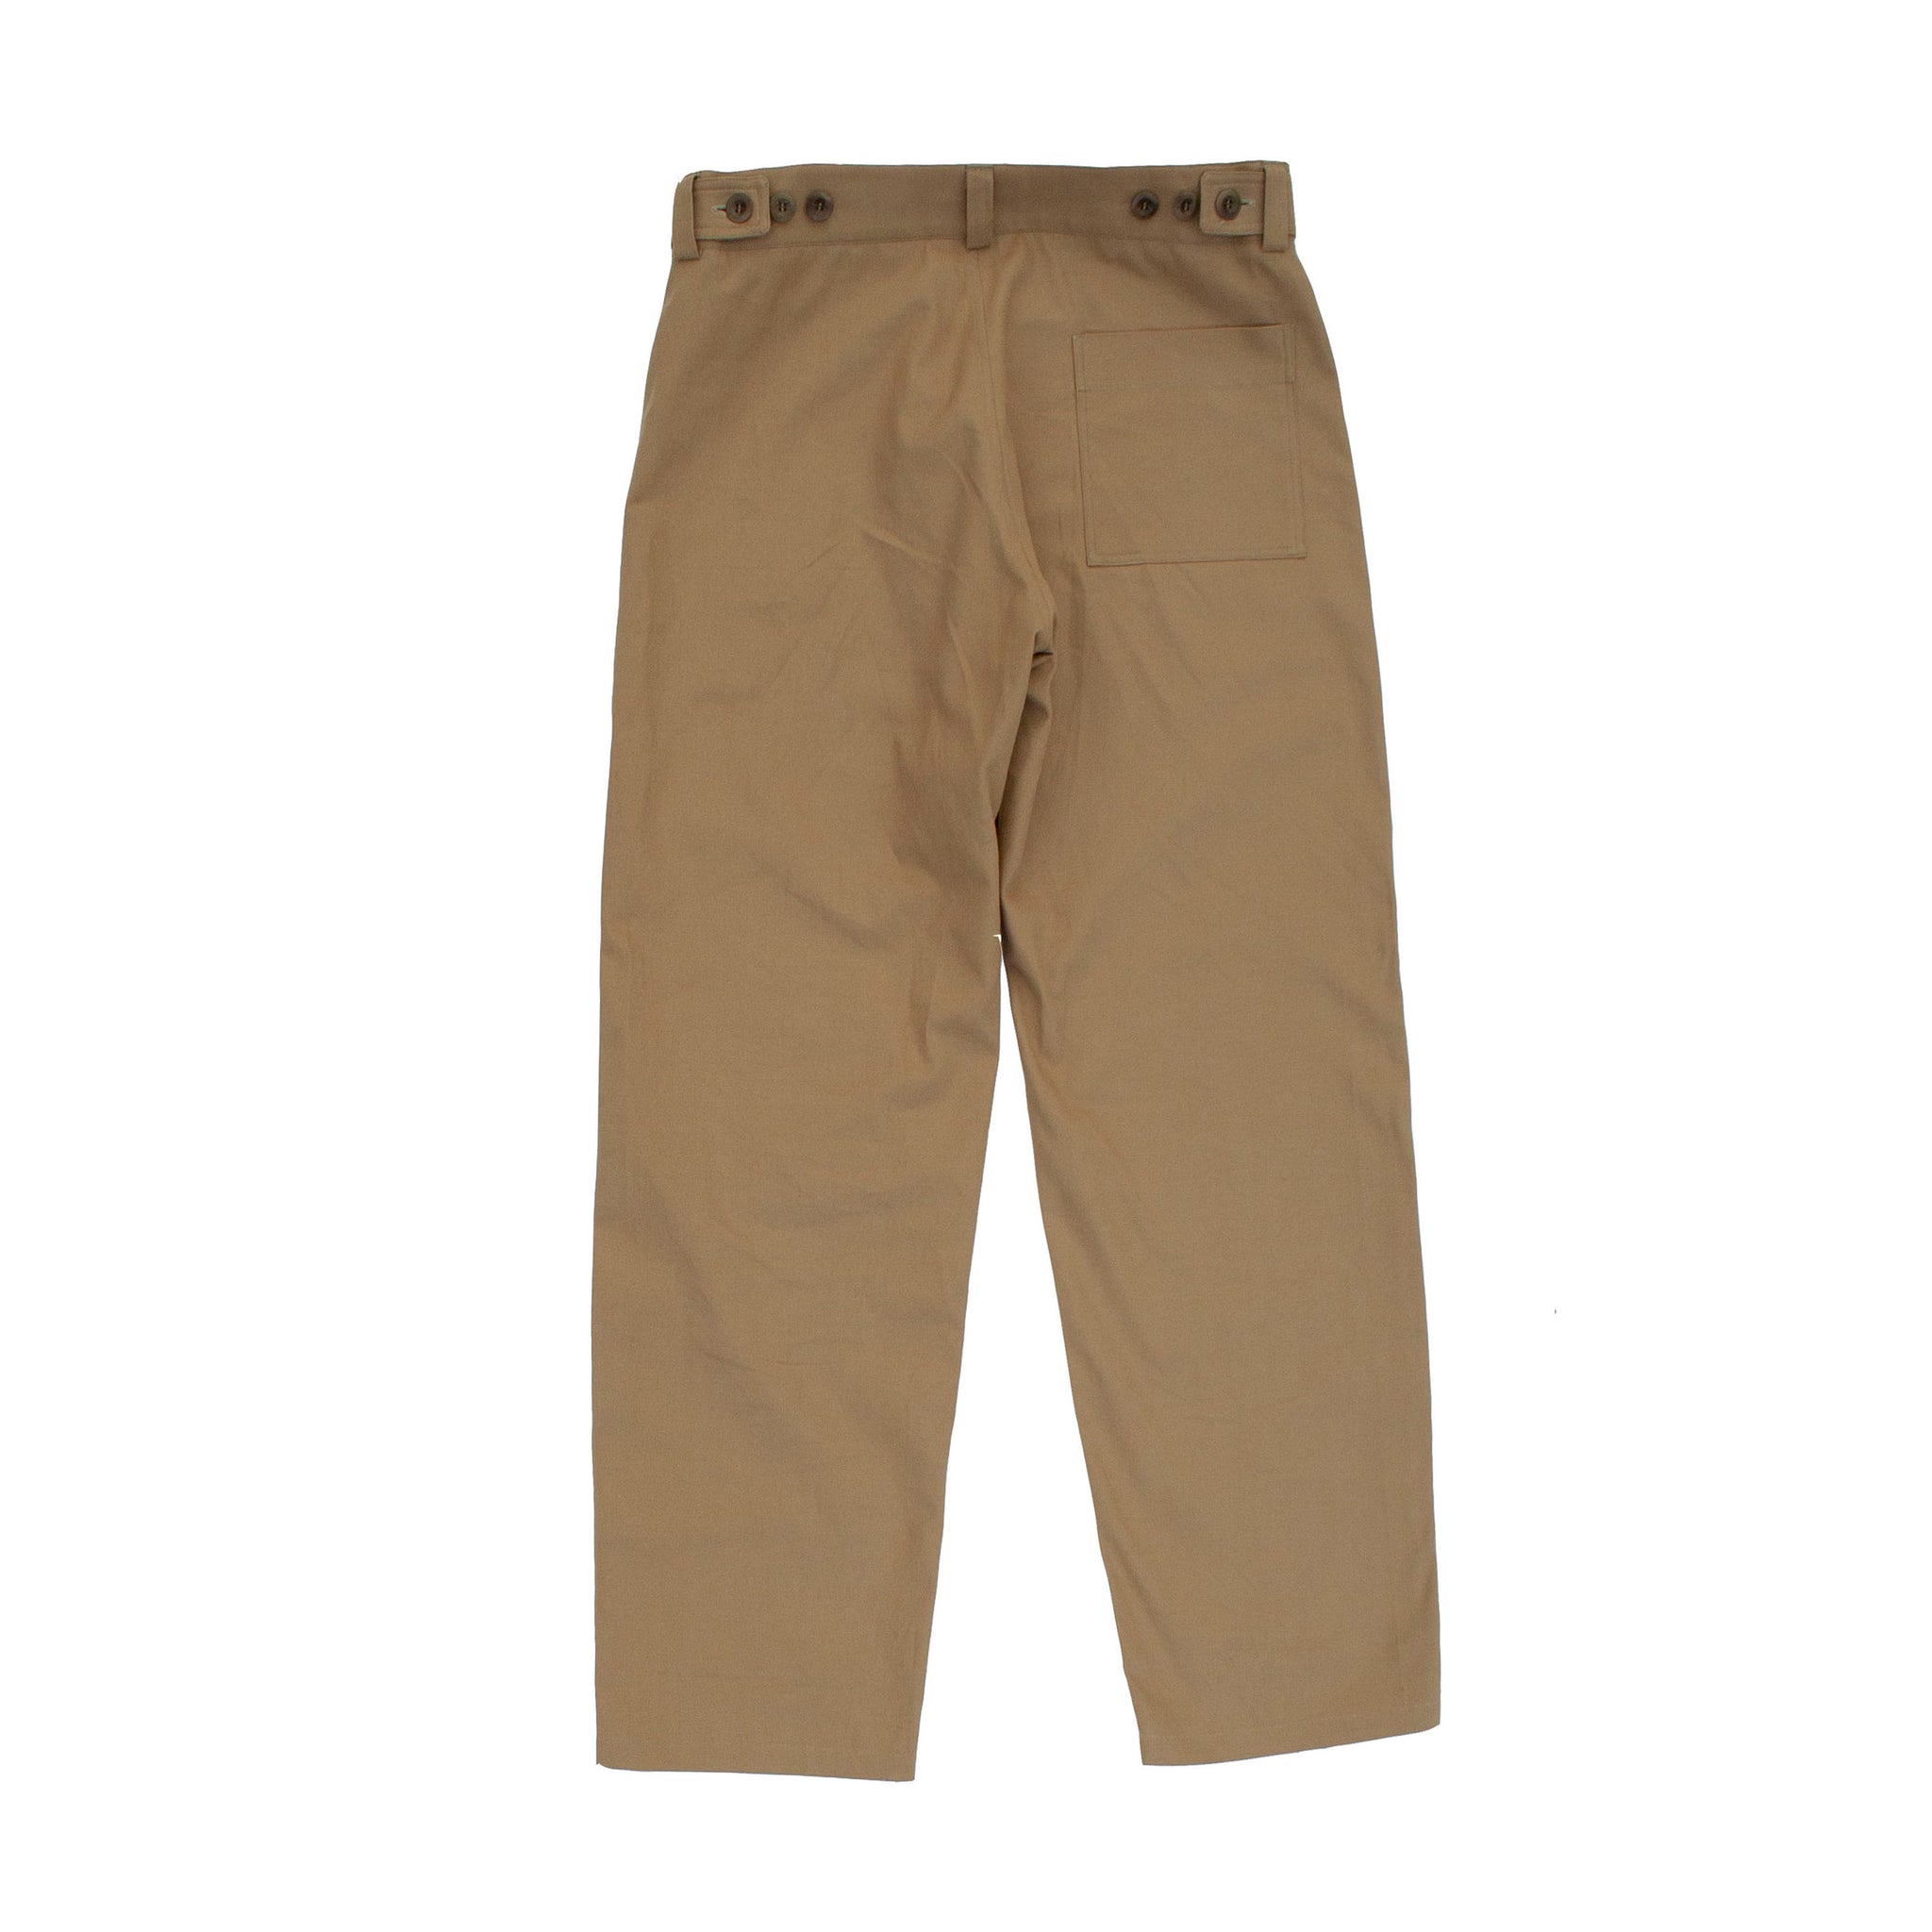 pajotten menswear back view of cotton canvas chore trousers in tan